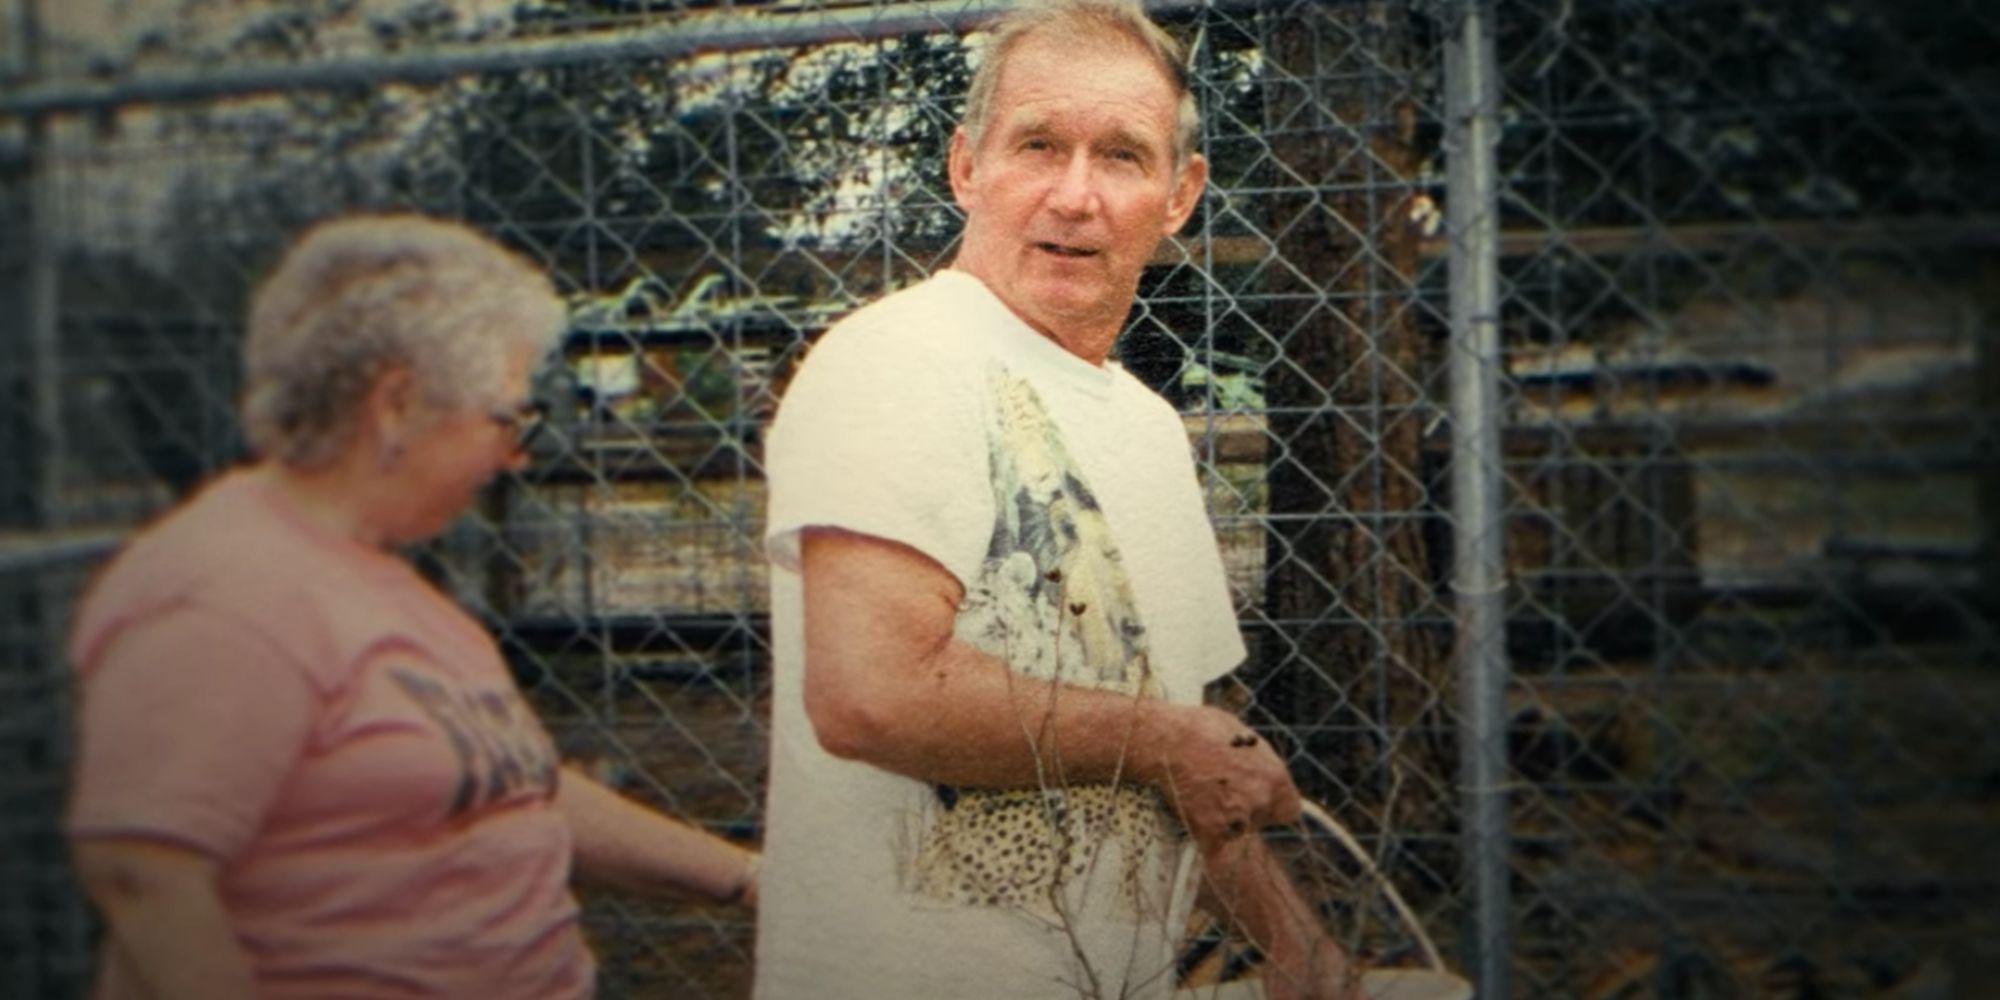 don lewis working at big cat rescue before his disappearance